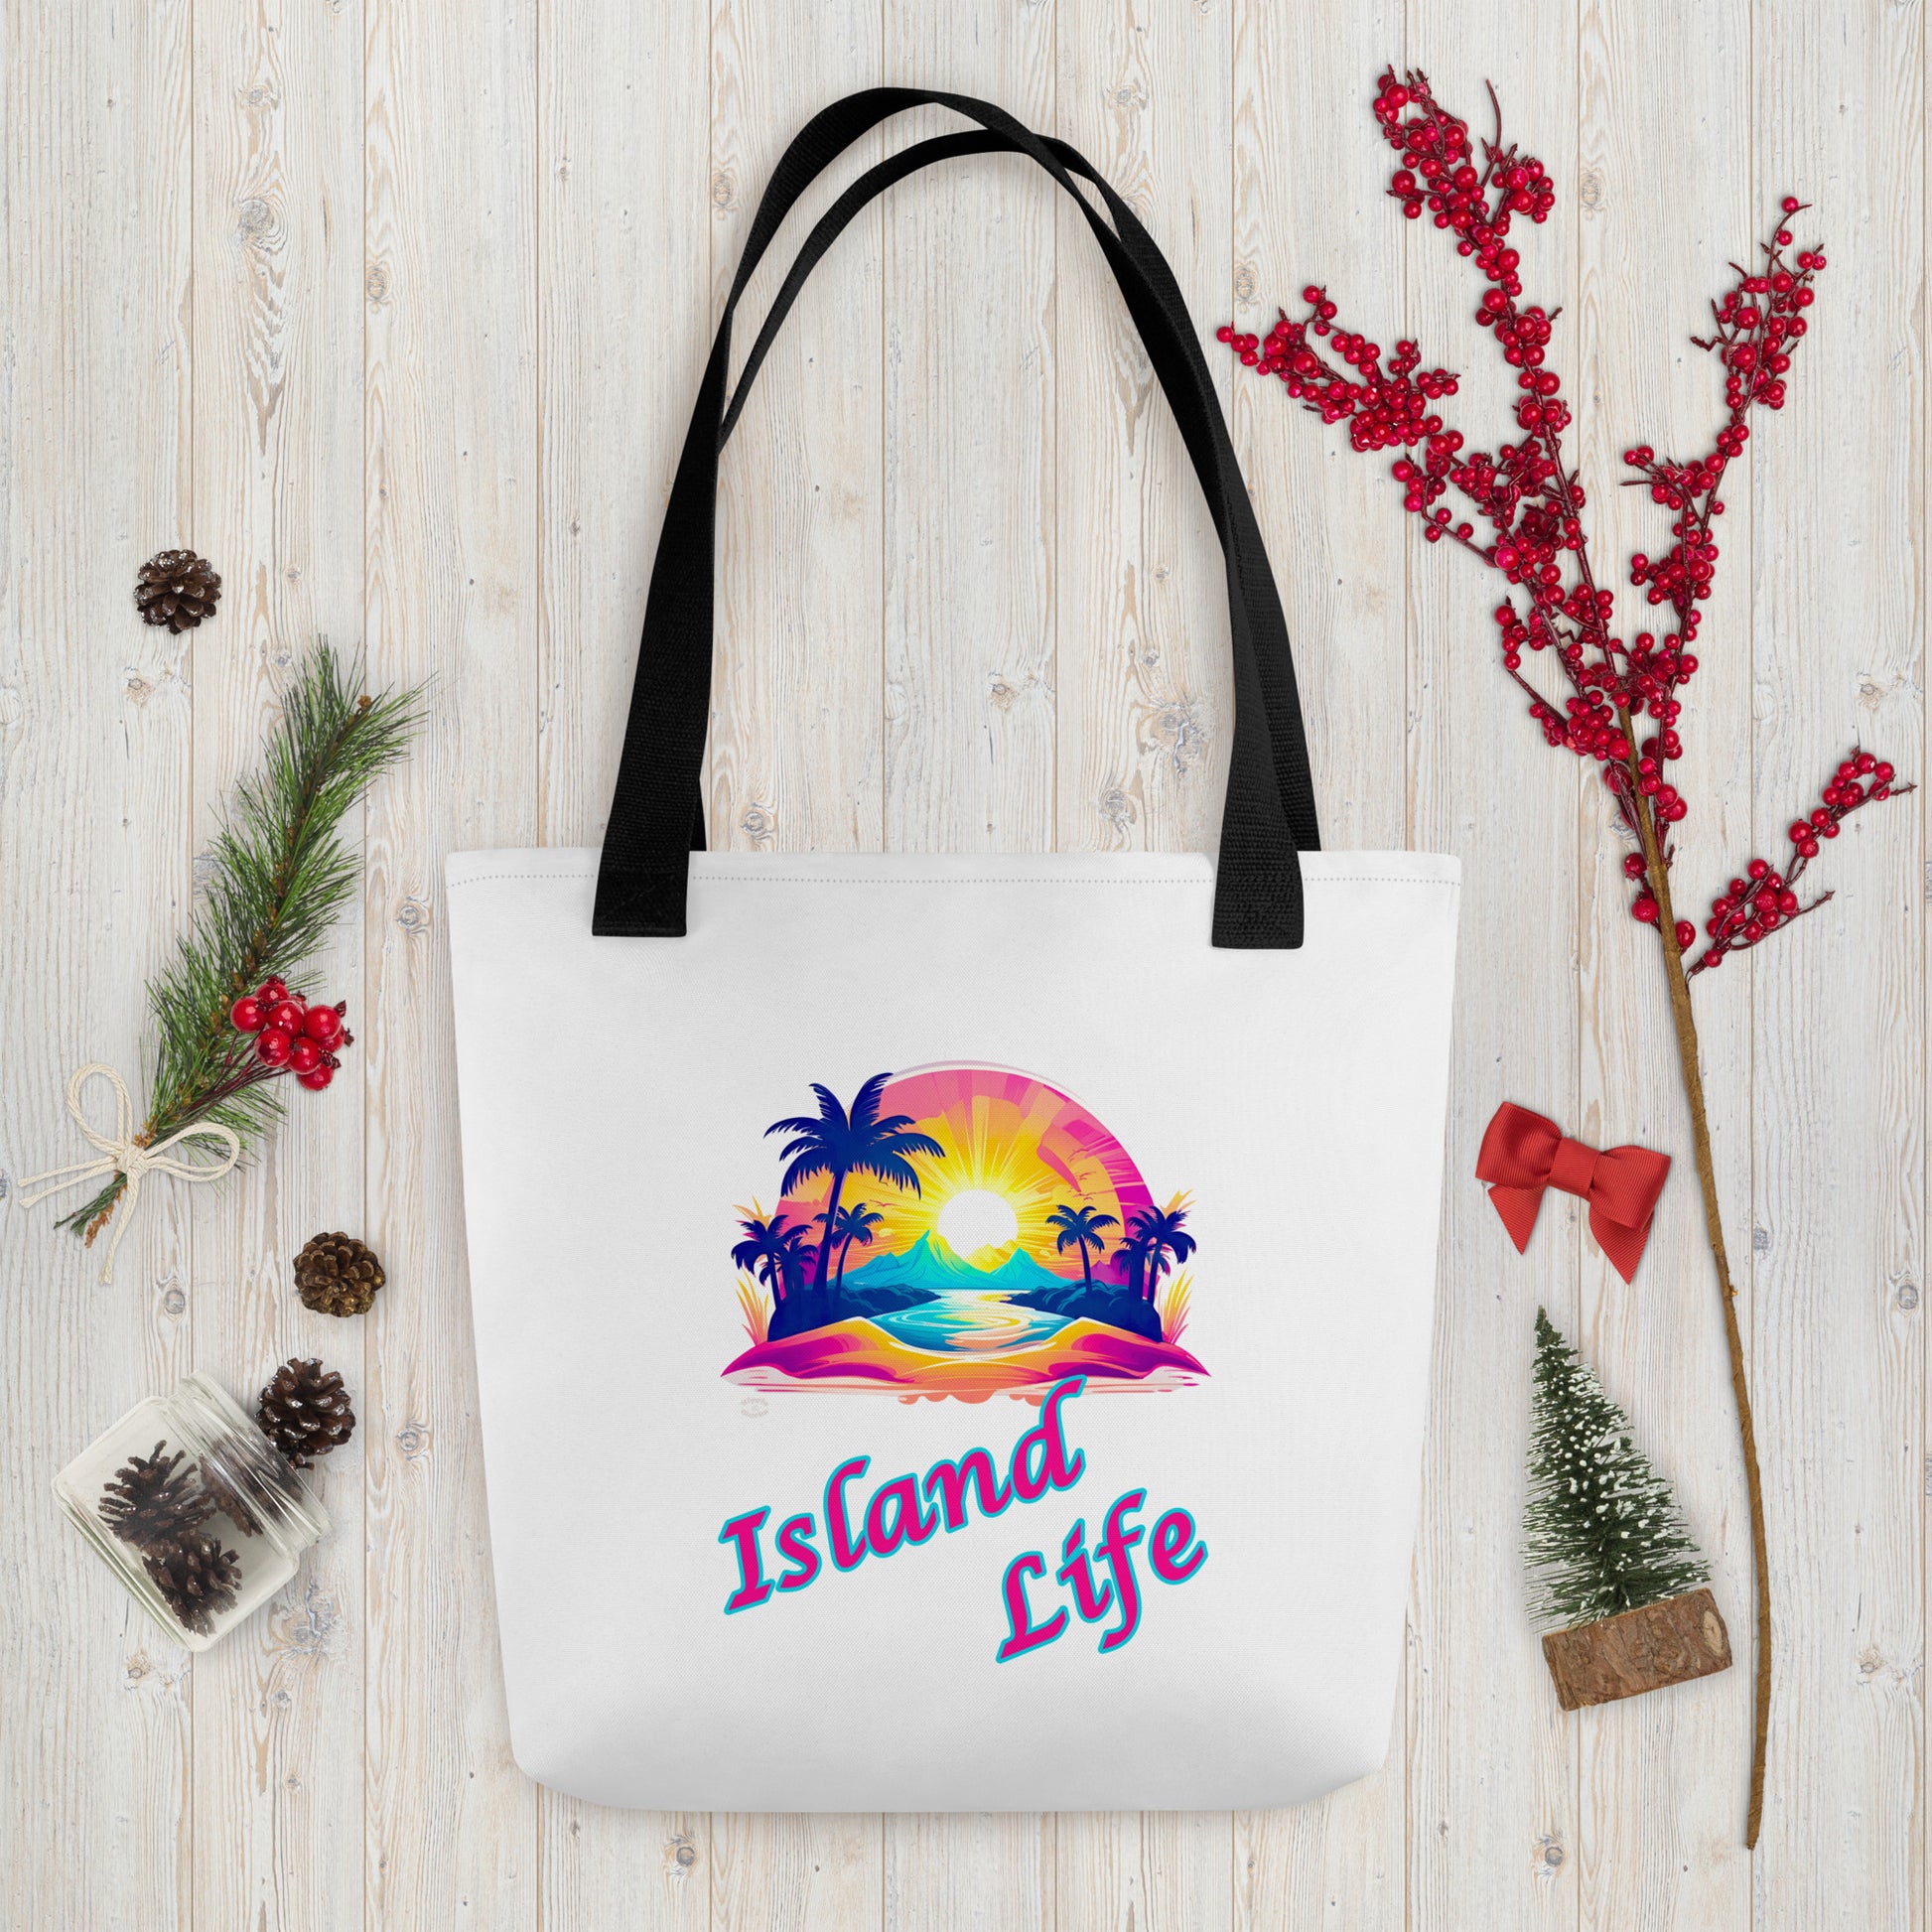 A picture of a Island Life Tote bag with a large picture of a tropical island paradise and the text Island Life underneath - black handles